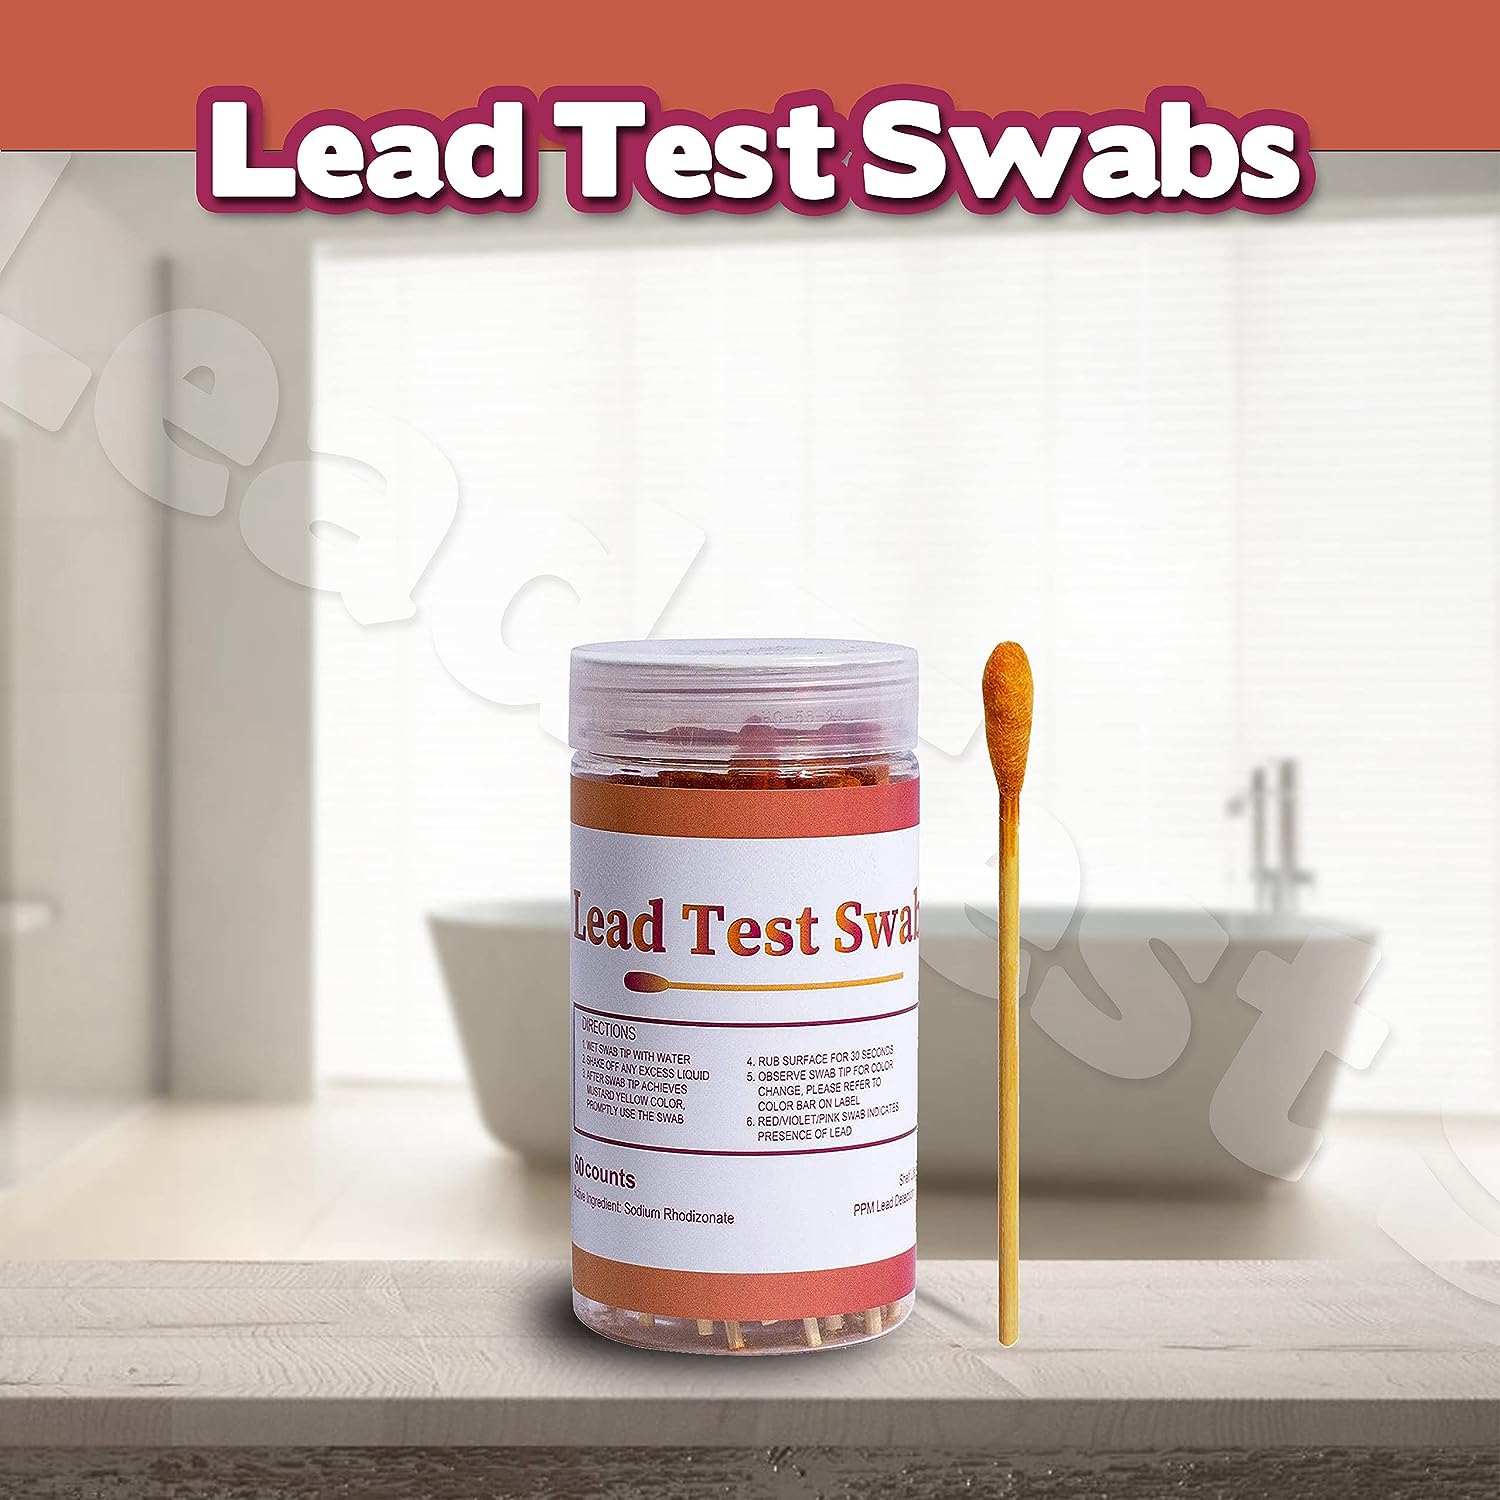 Residential Lead Detection Instant Lead Test Swab Kit Home Lead Testing (80X4=320 Pcs Rapid Home Testing Swabs) 30-Second Results. Dip in White Vinegar. Home Use for All Surfaces - Painted, Dishes, Toys, Jewelry, Metal, Ceramics, Wood (LS320)